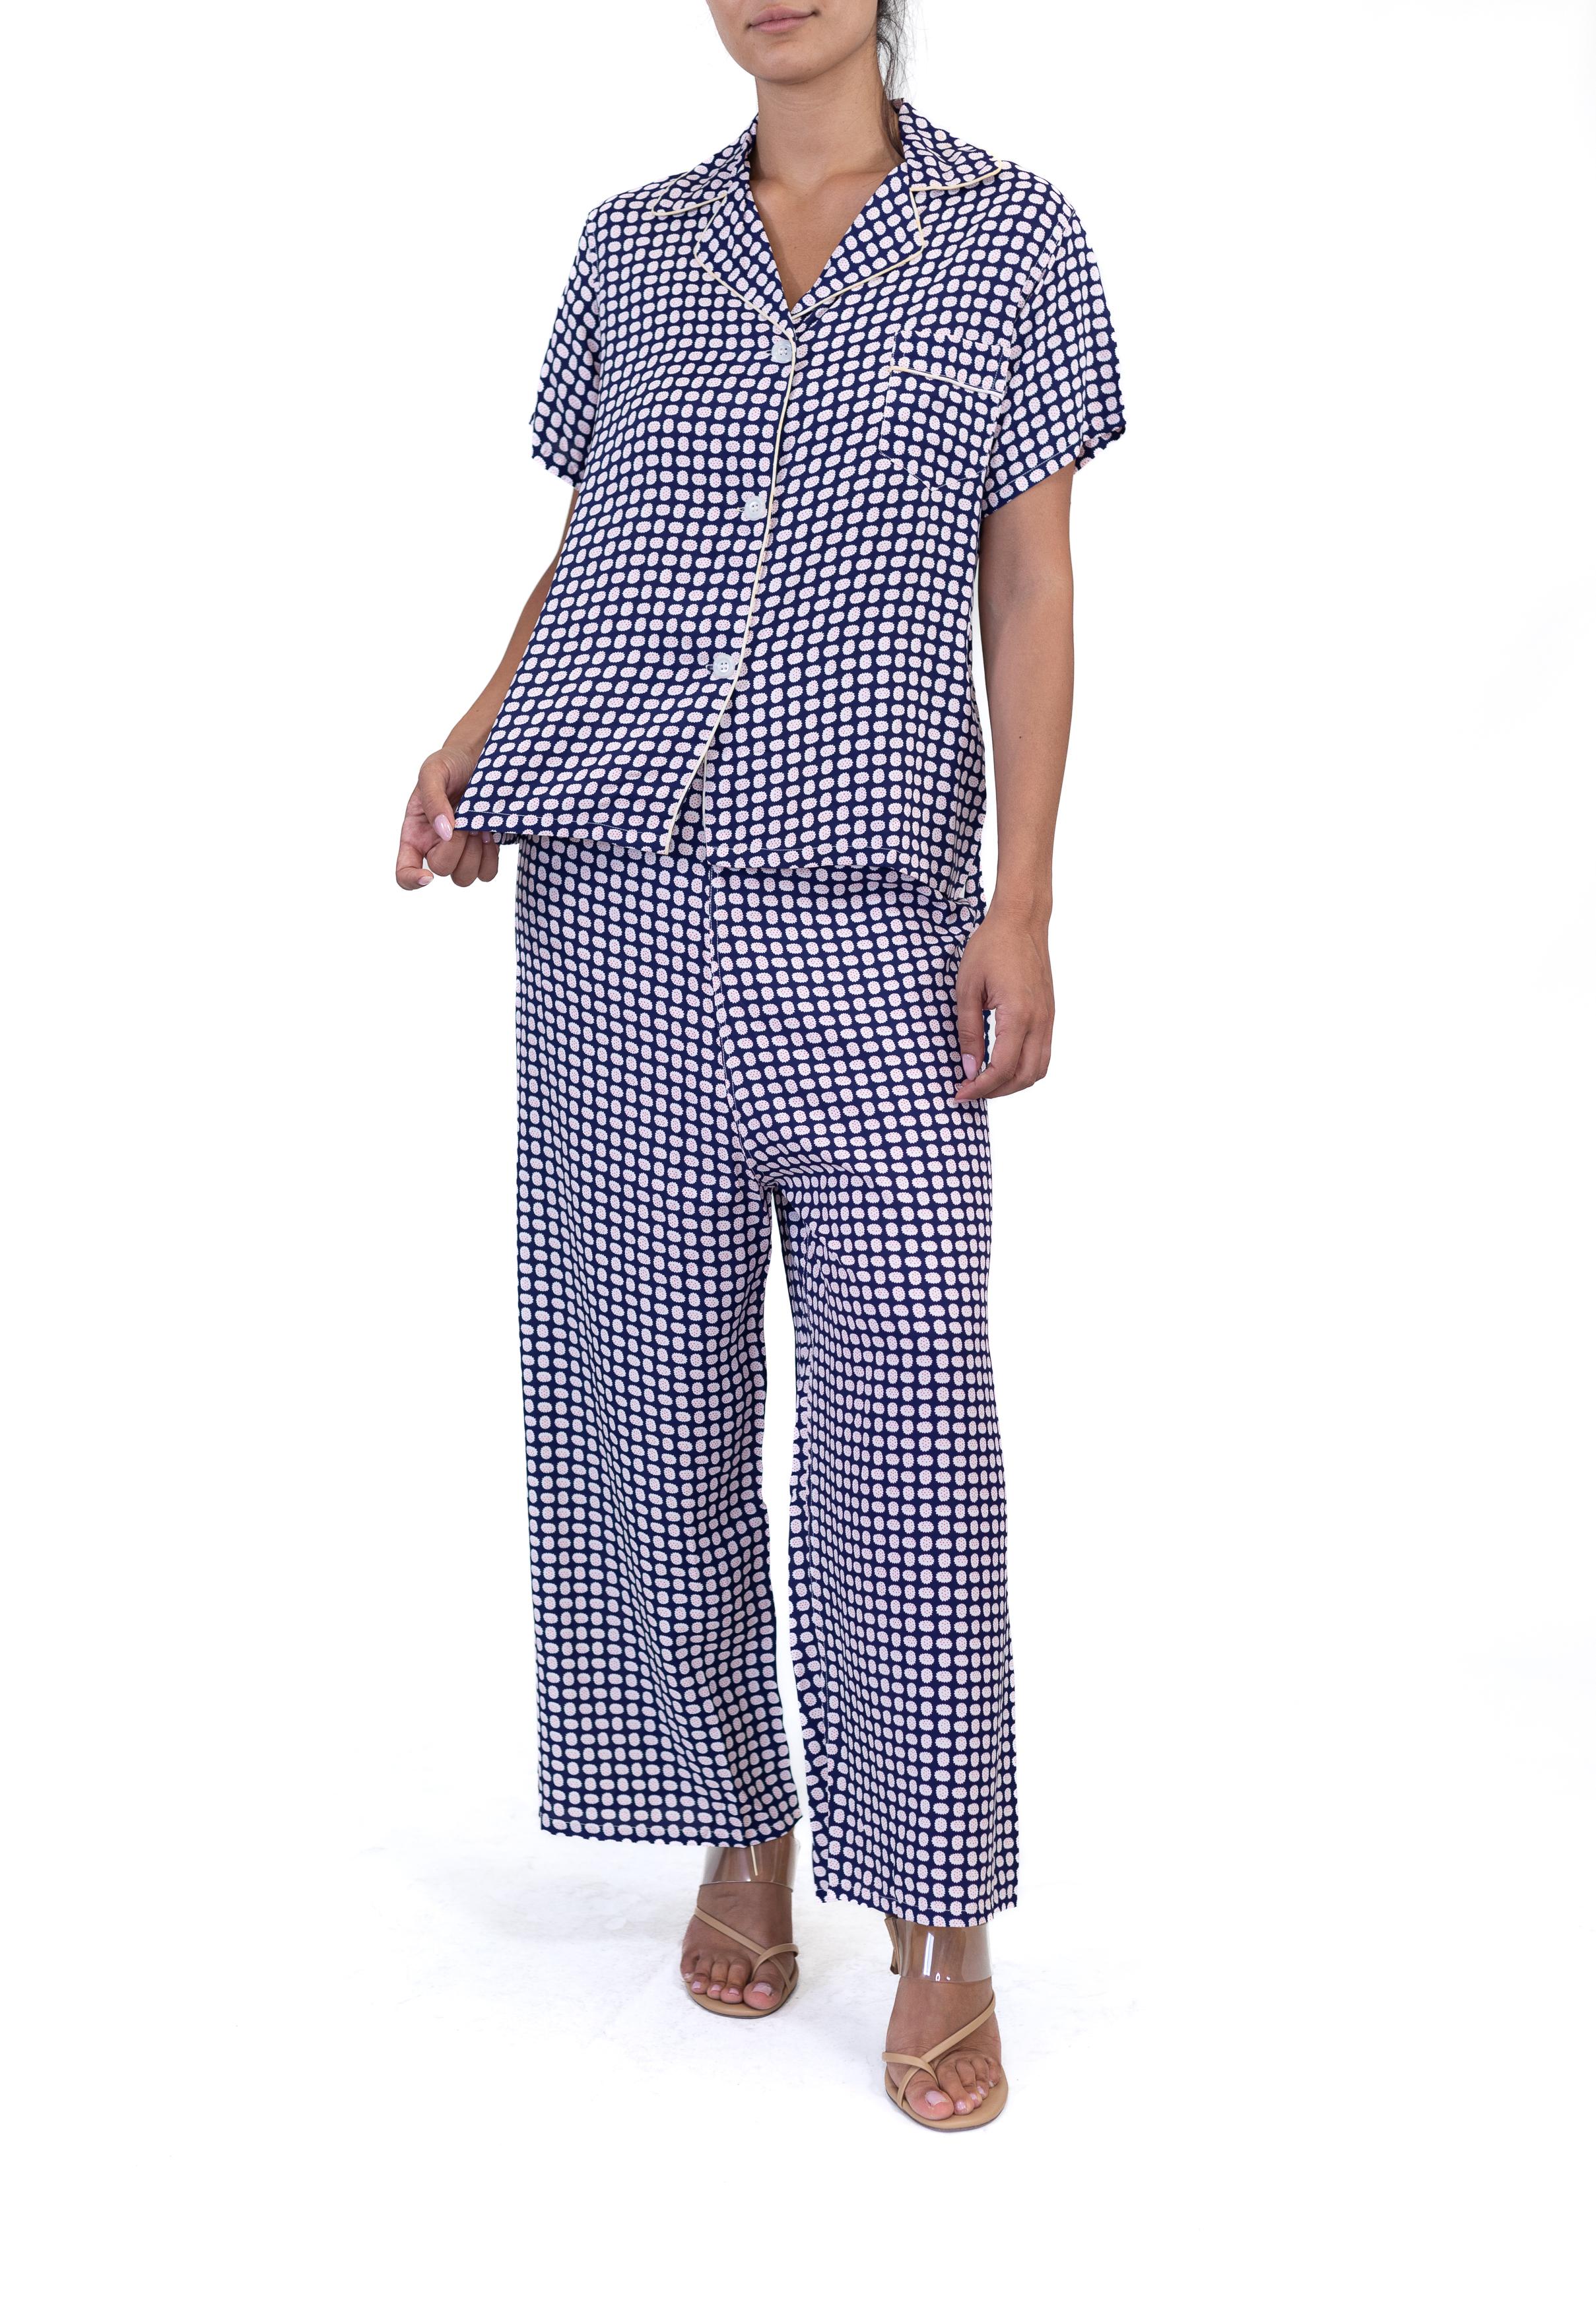 1940S Lewis Frimel Co Blue & White Cold Rayon Polka Dot Print Pajamas In Excellent Condition For Sale In New York, NY